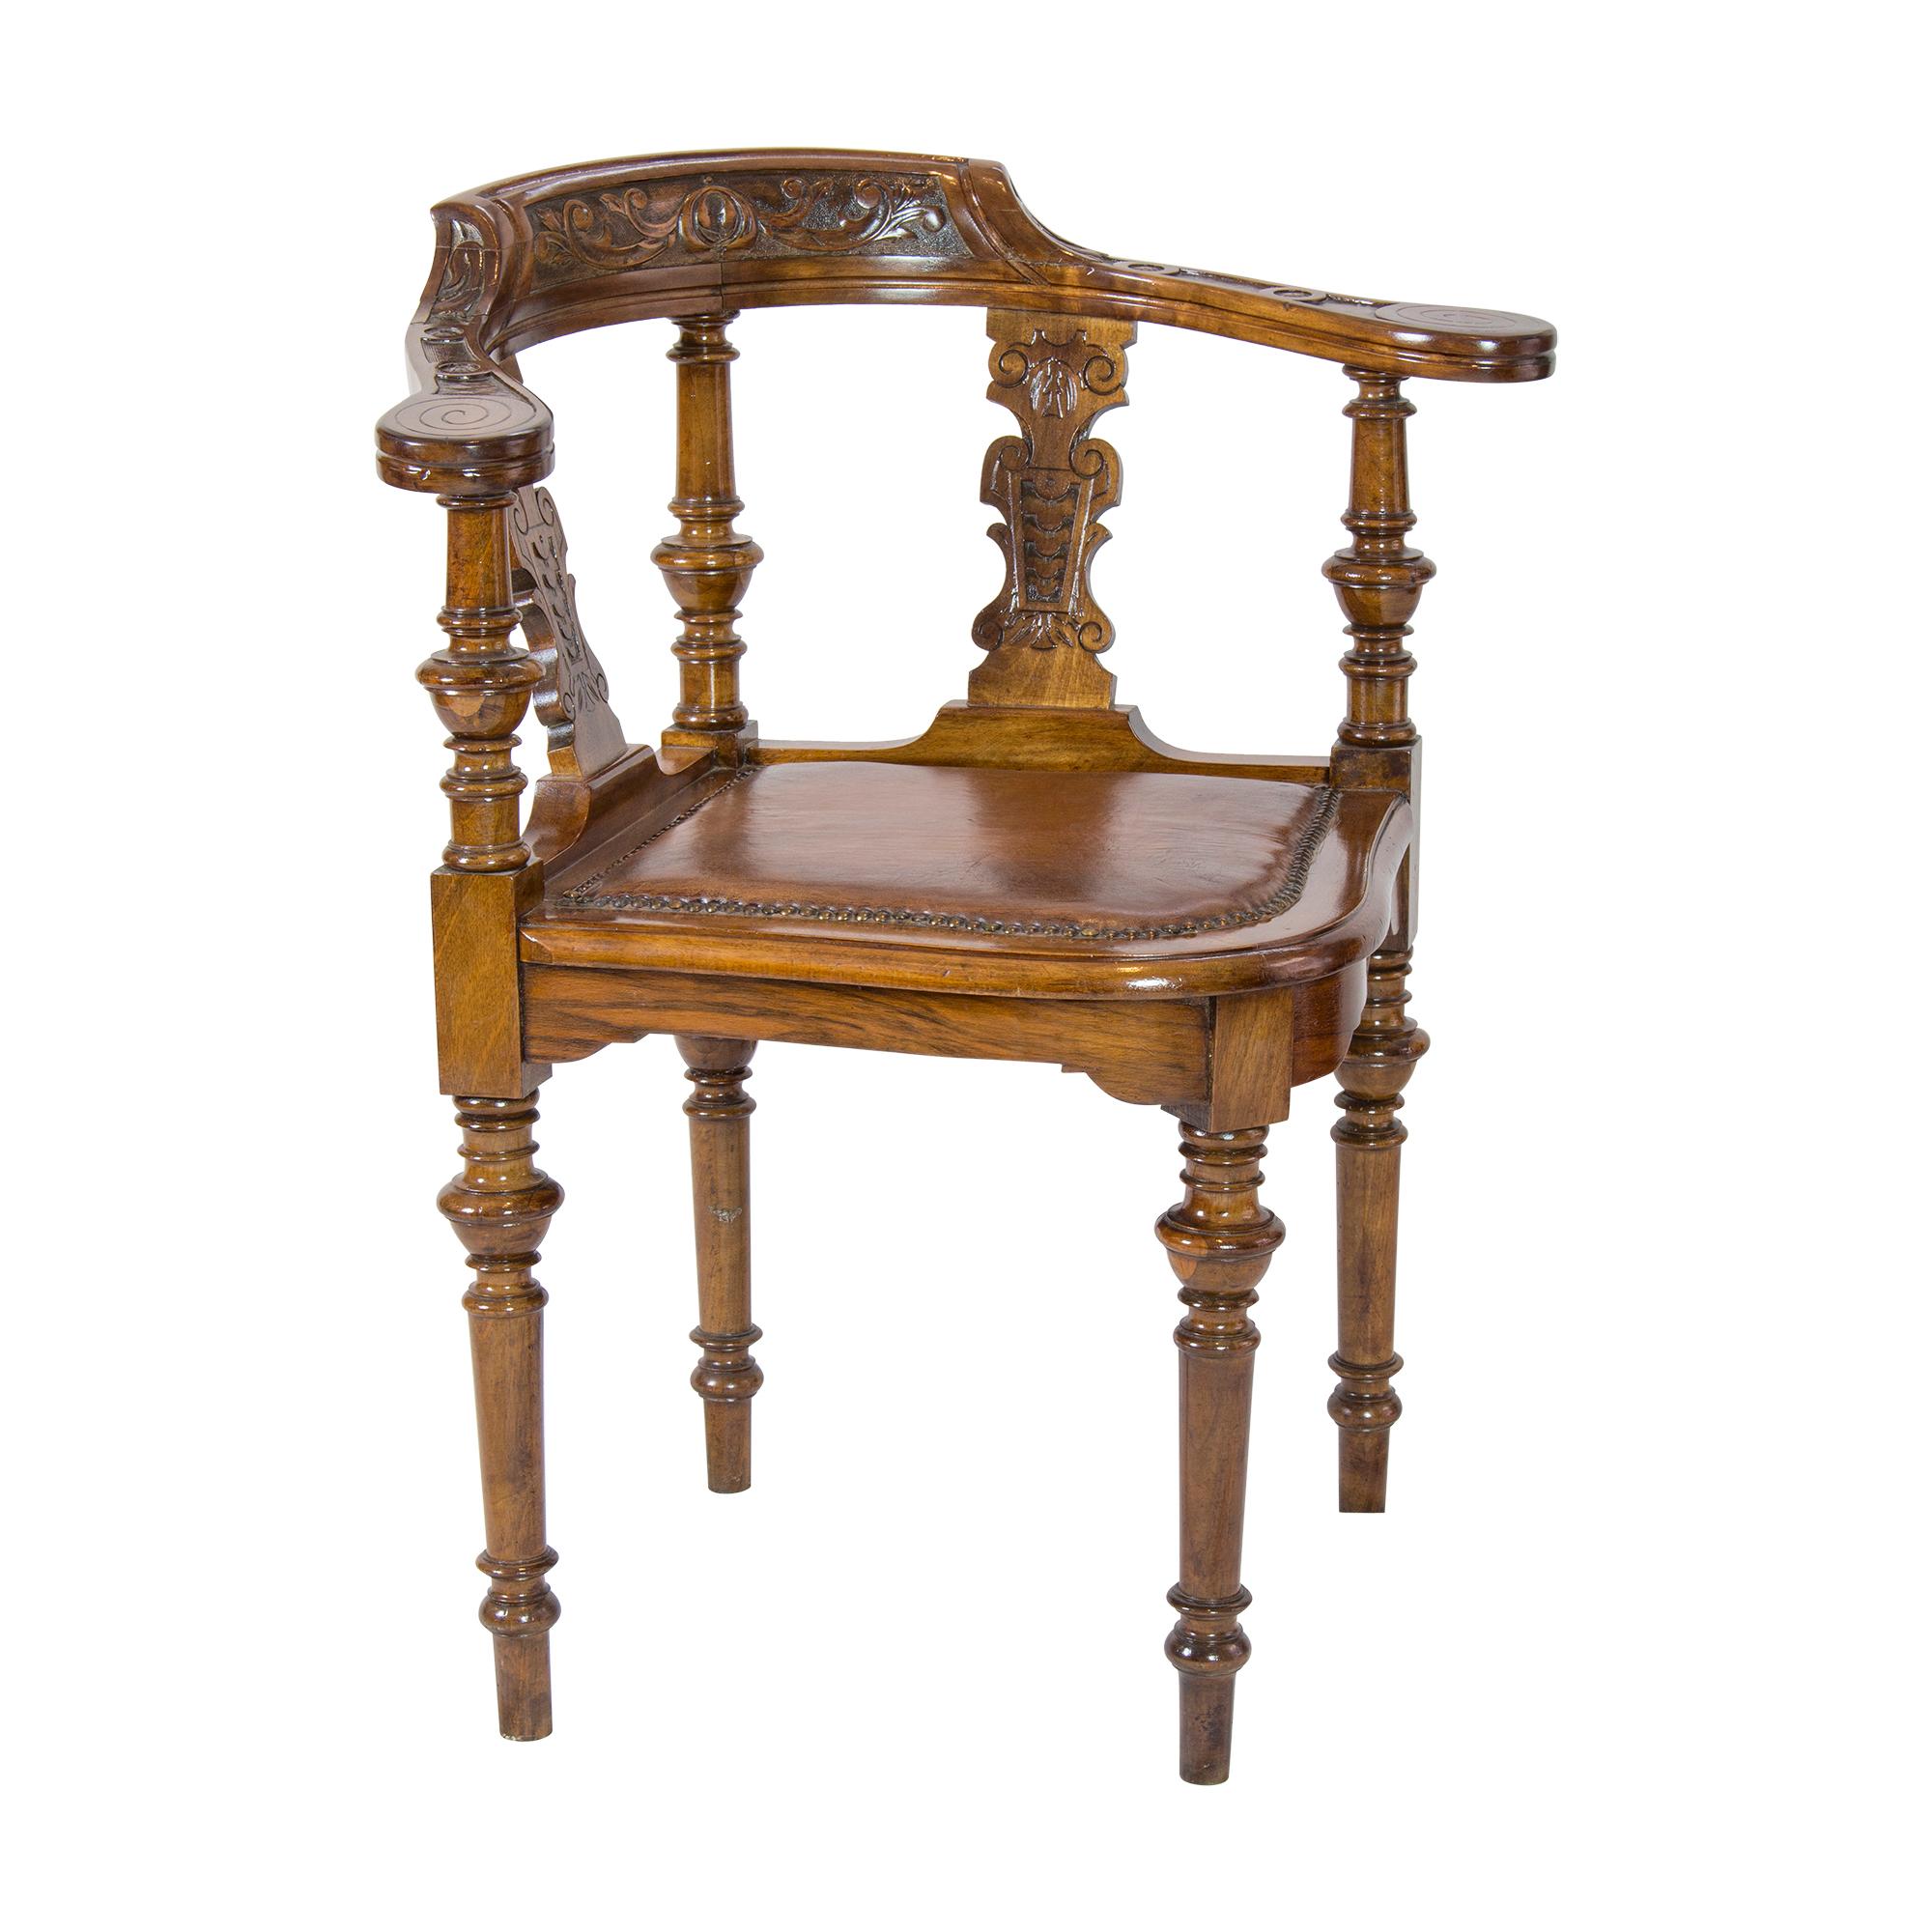 Very beautiful rare corner chair on which you can sit comfortably. The corner chair dates from around 1870 in Germany, from the Wilhelminian period. The chair was made of solid walnut. The seat was newly covered with sheepskin, which was